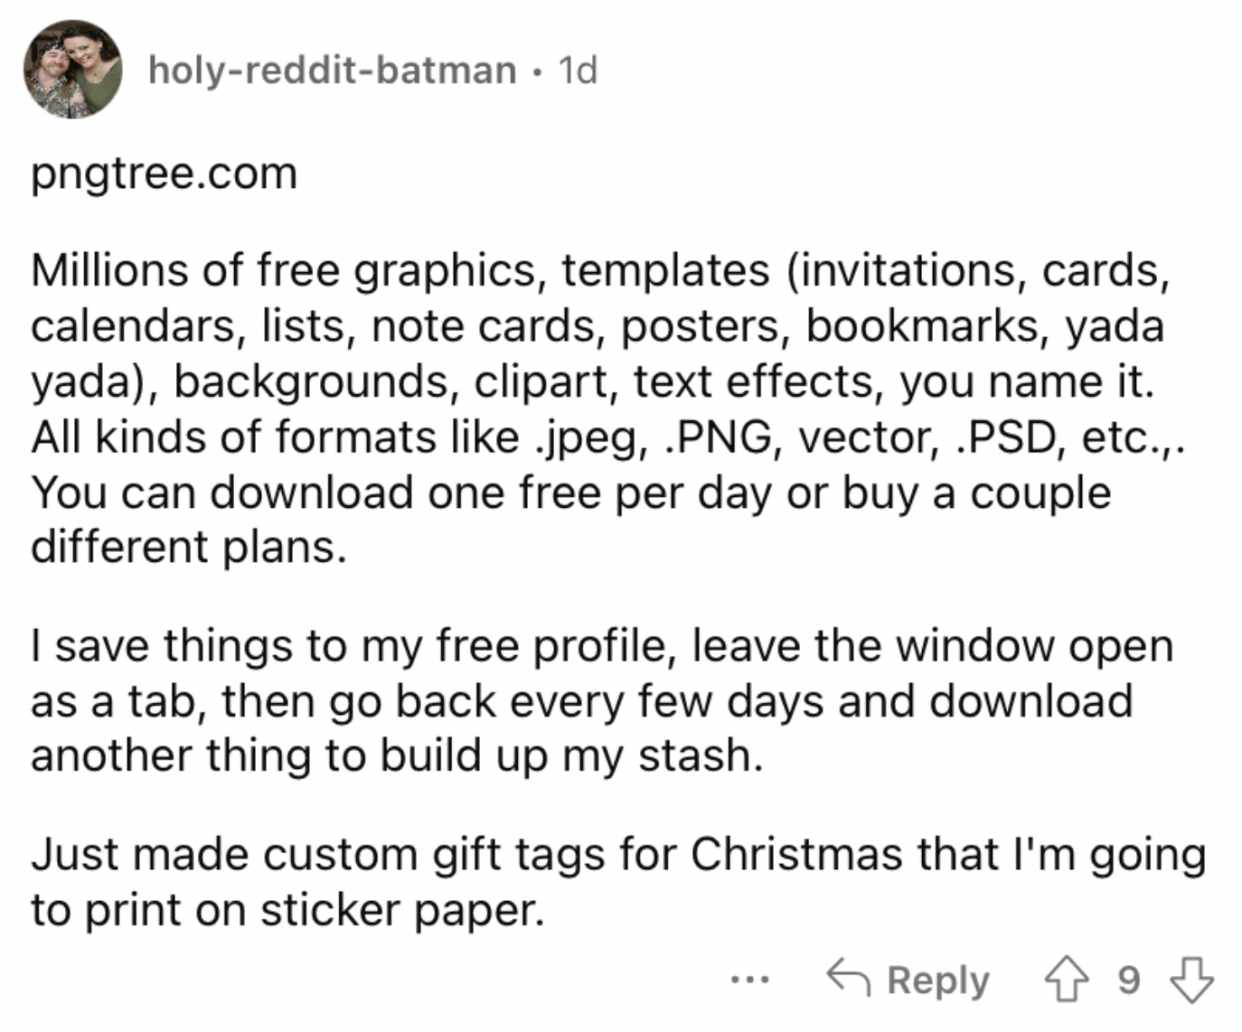 Reddit screenshot about pngtree.com being a great app.